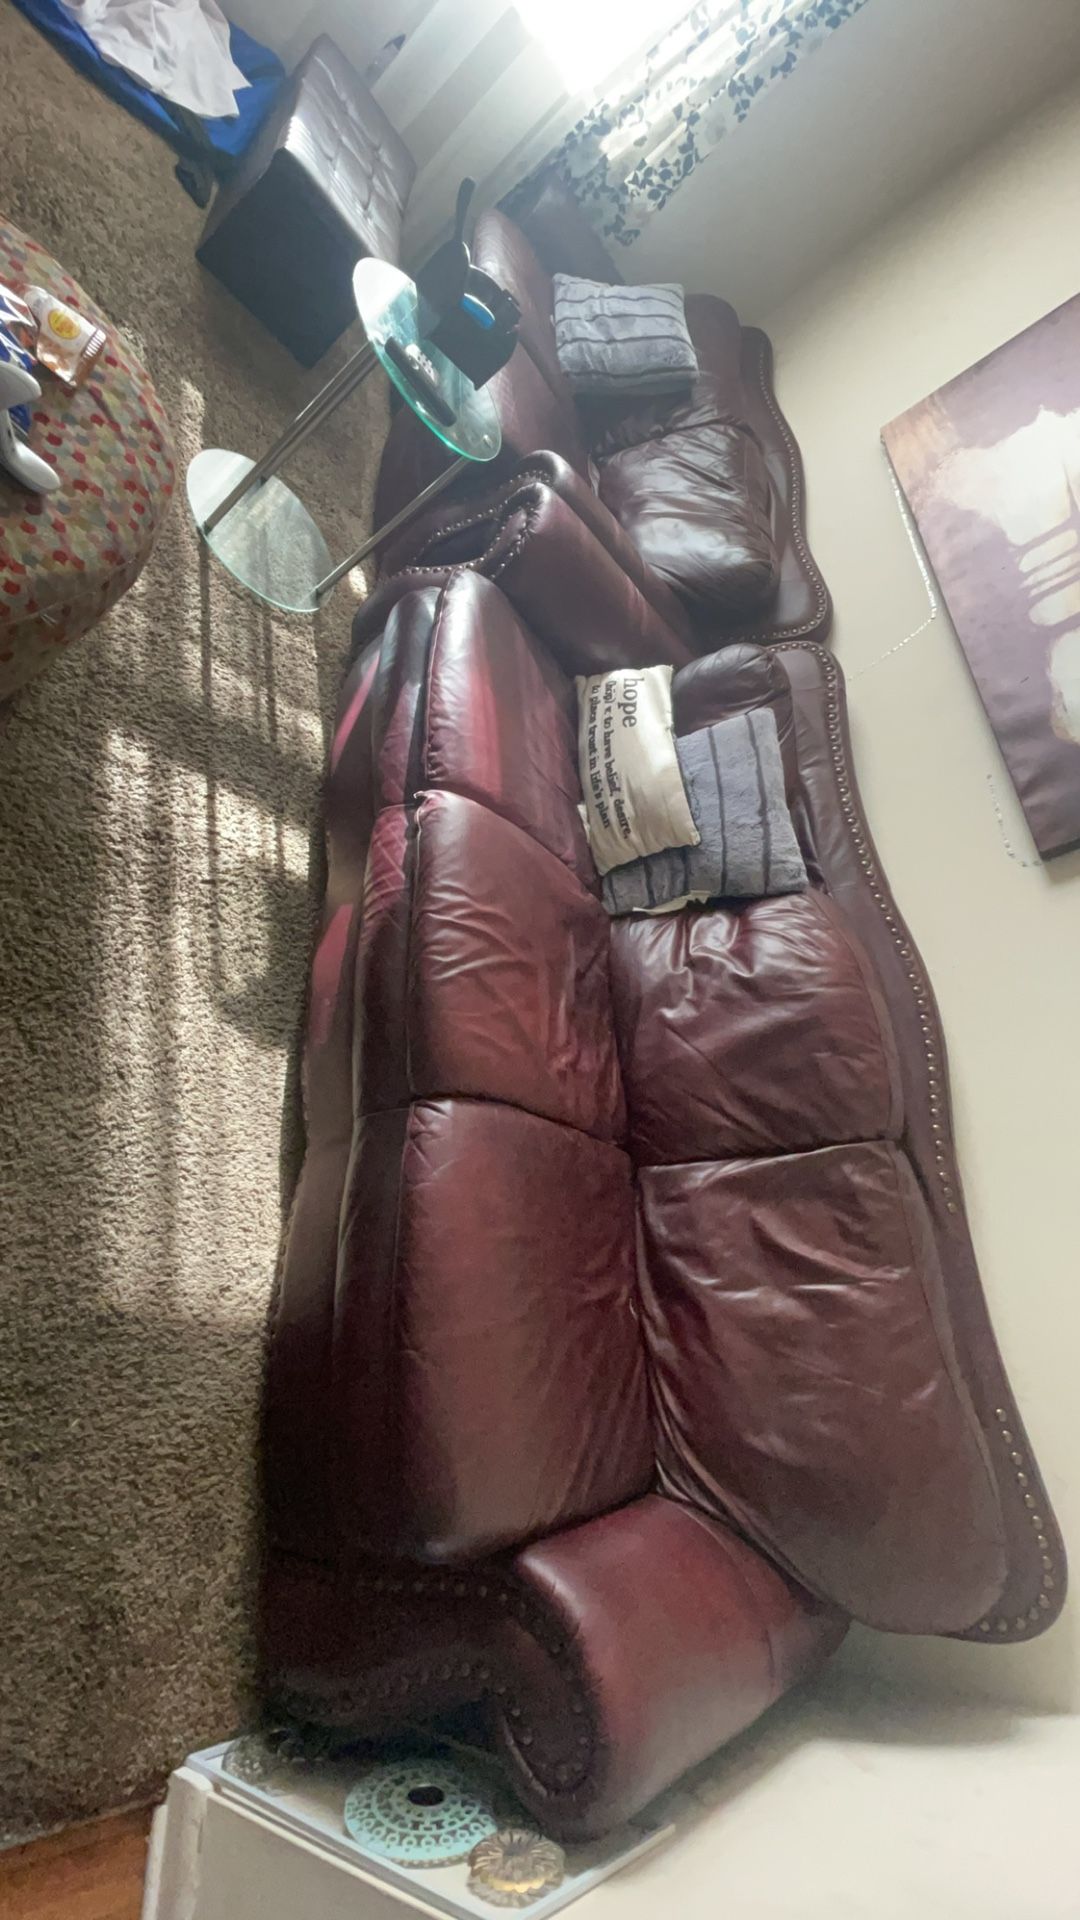 Italian Leather Imported Burgundy Love Seat And 3 Seat Couch